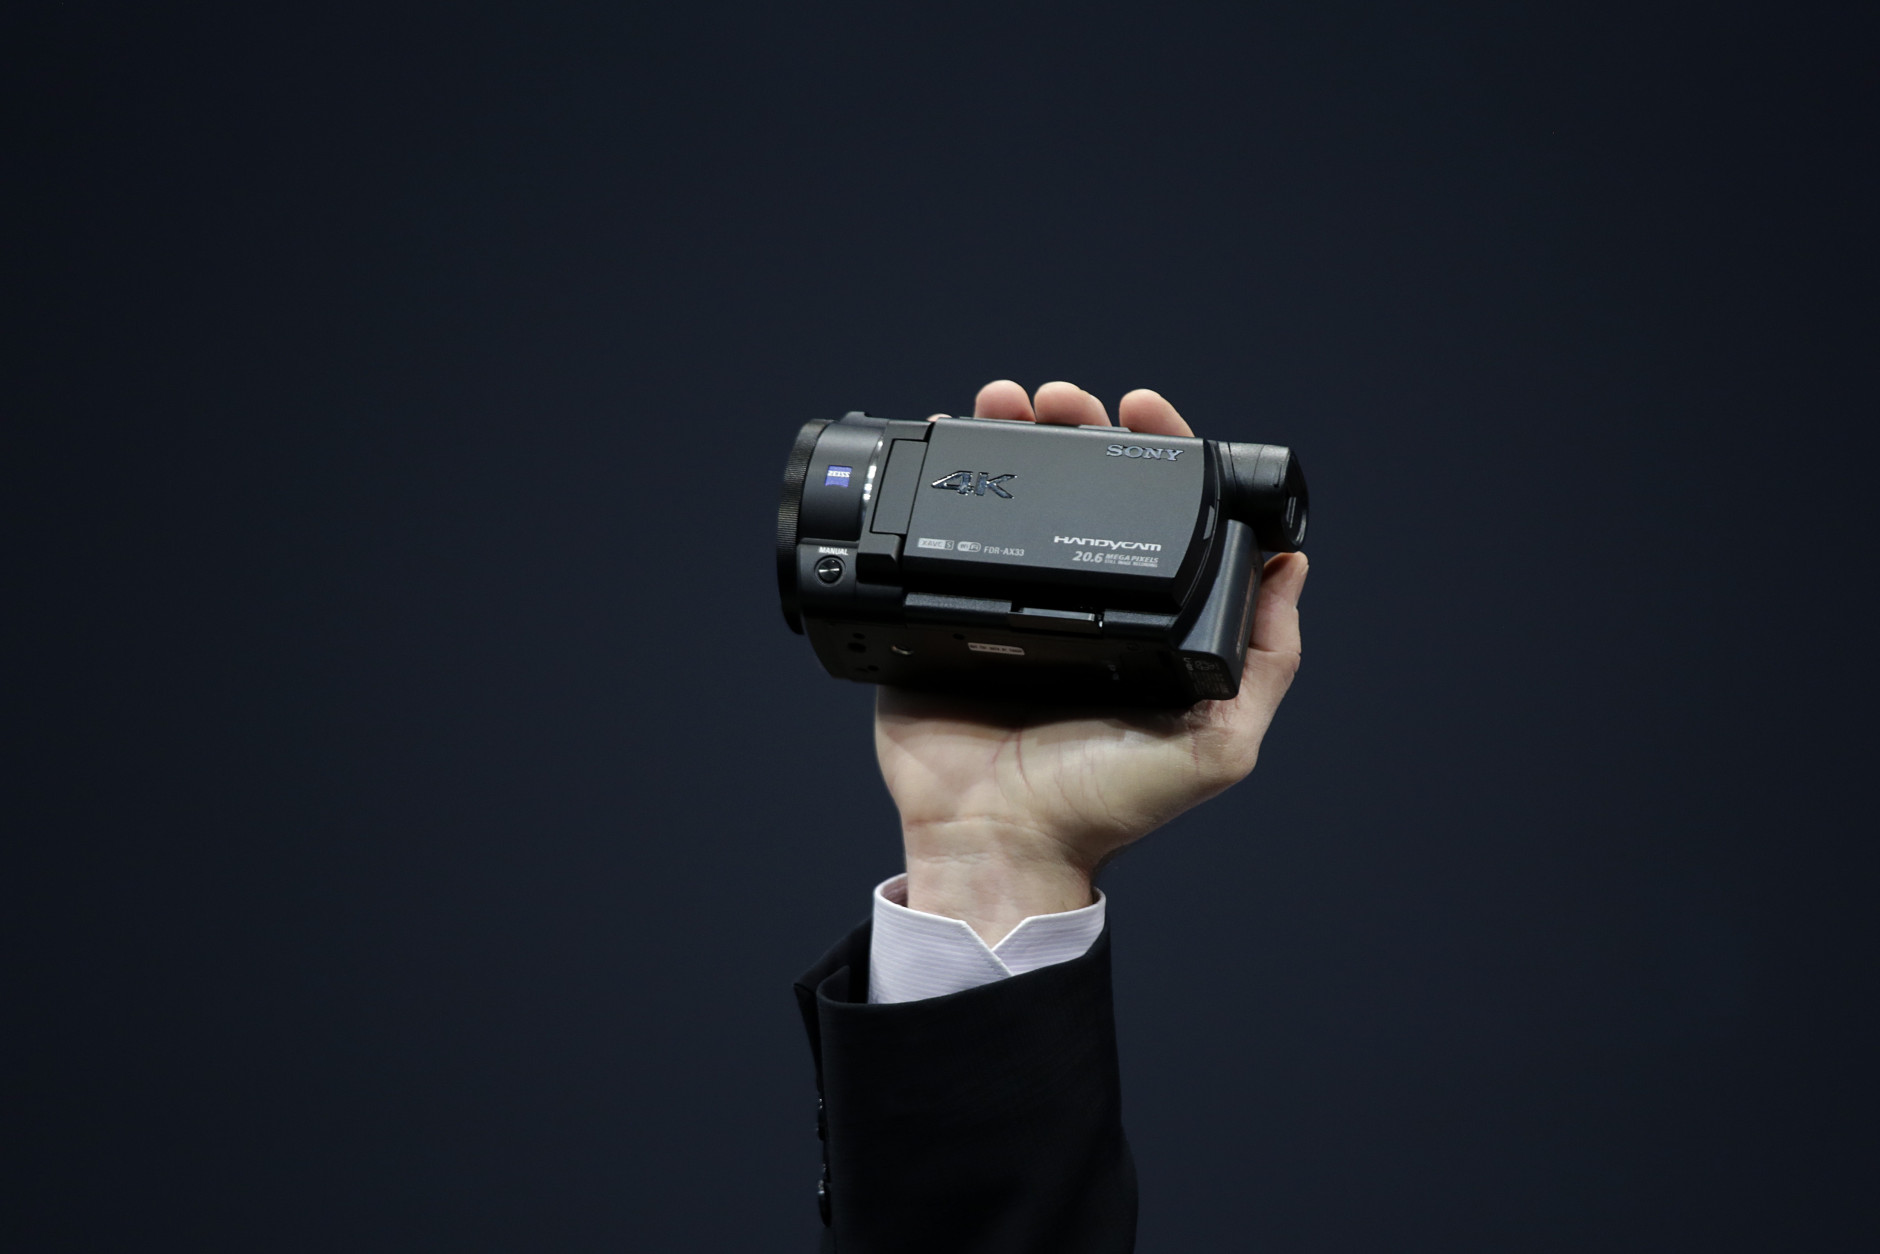 Mike Fasulo, president and chief operating officer of Sony Electronics, introduces the new 4K camcorder during a news conference at the International CES Monday, Jan. 5, 2015, in Las Vegas. (AP Photo/Jae C. Hong)